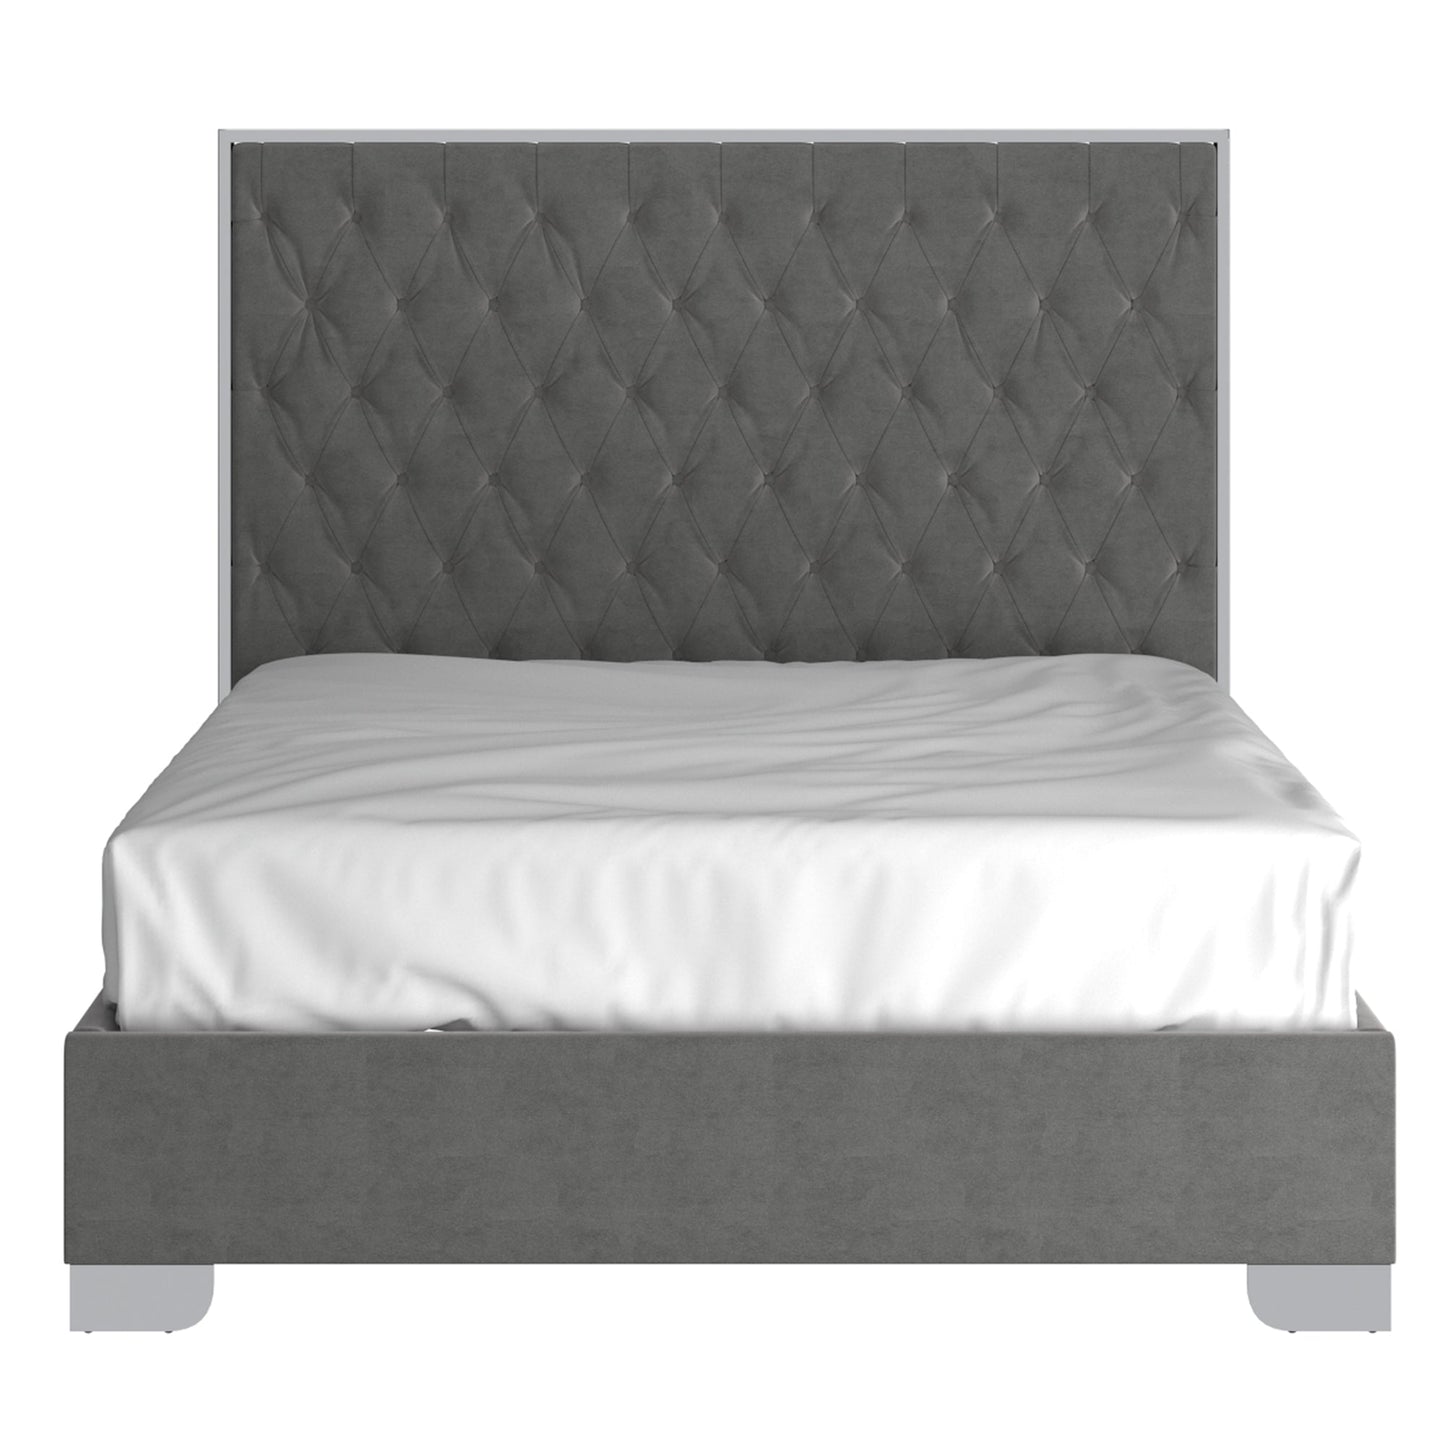 QUEEN SIZE- (LUCILLE GREY)- VELVET FABRIC - BUTTON FABRIC- BED FRAME- (BOX SPRING REQUIRED)